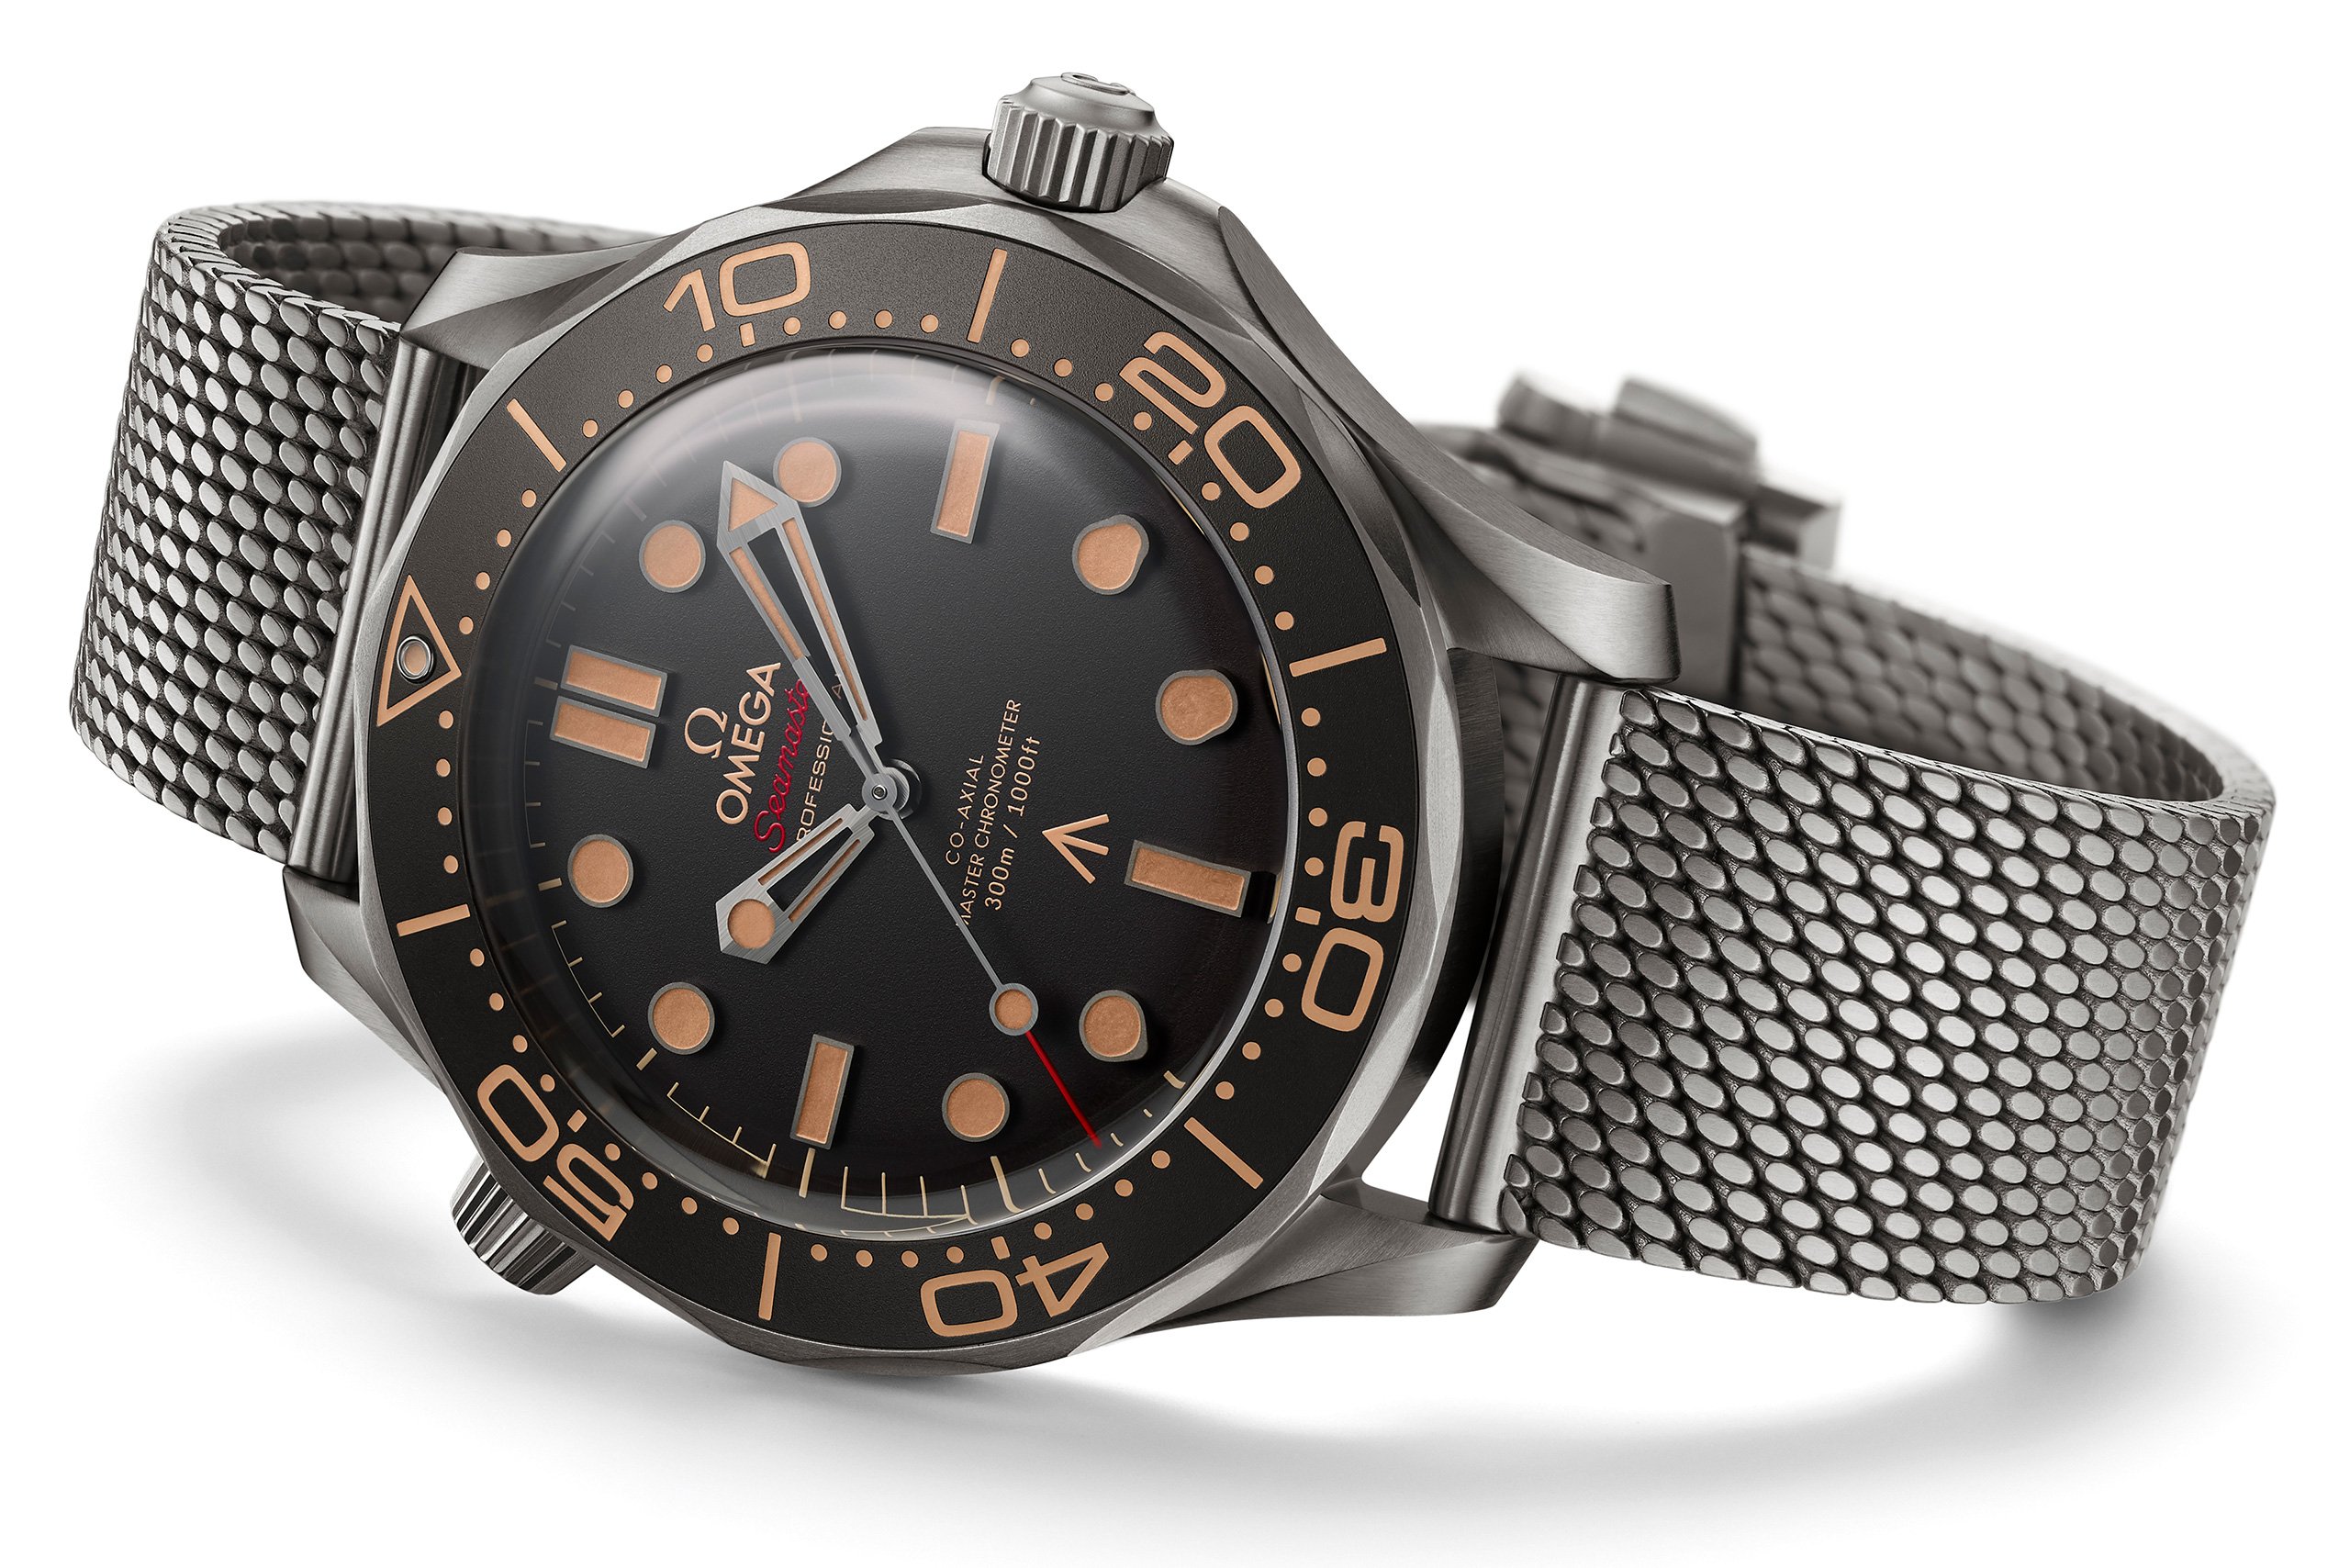 No Time to Die: James Bond's Omega Seamaster Diver 300M "007 Edition